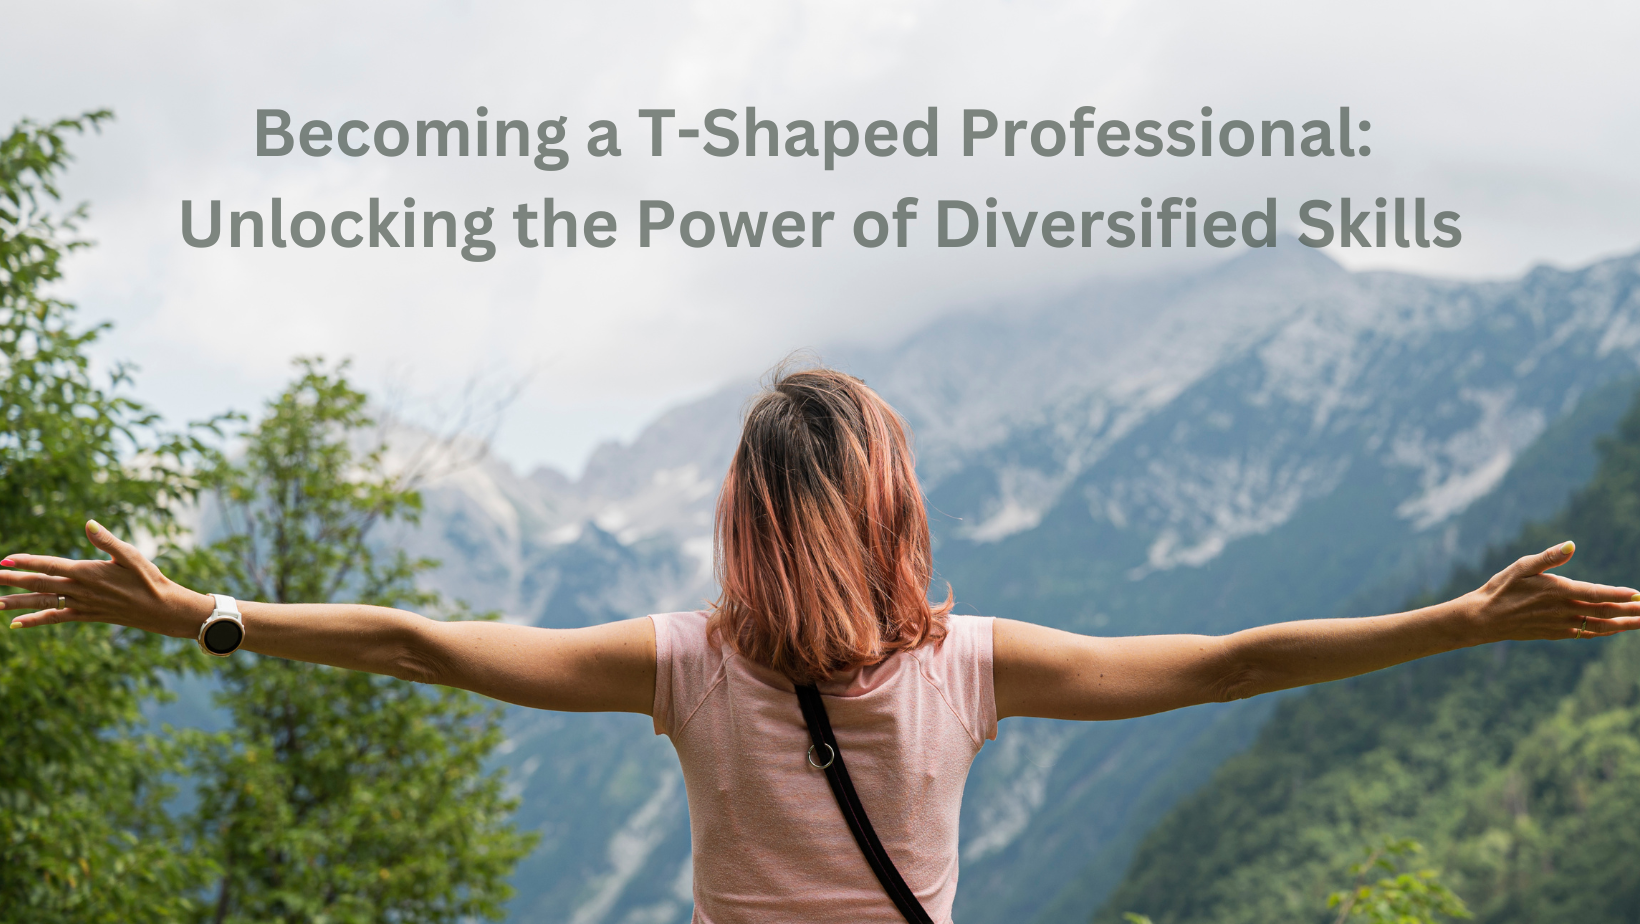 Becoming a T-Shaped Professional: Unlocking the Power of Diversified Skills